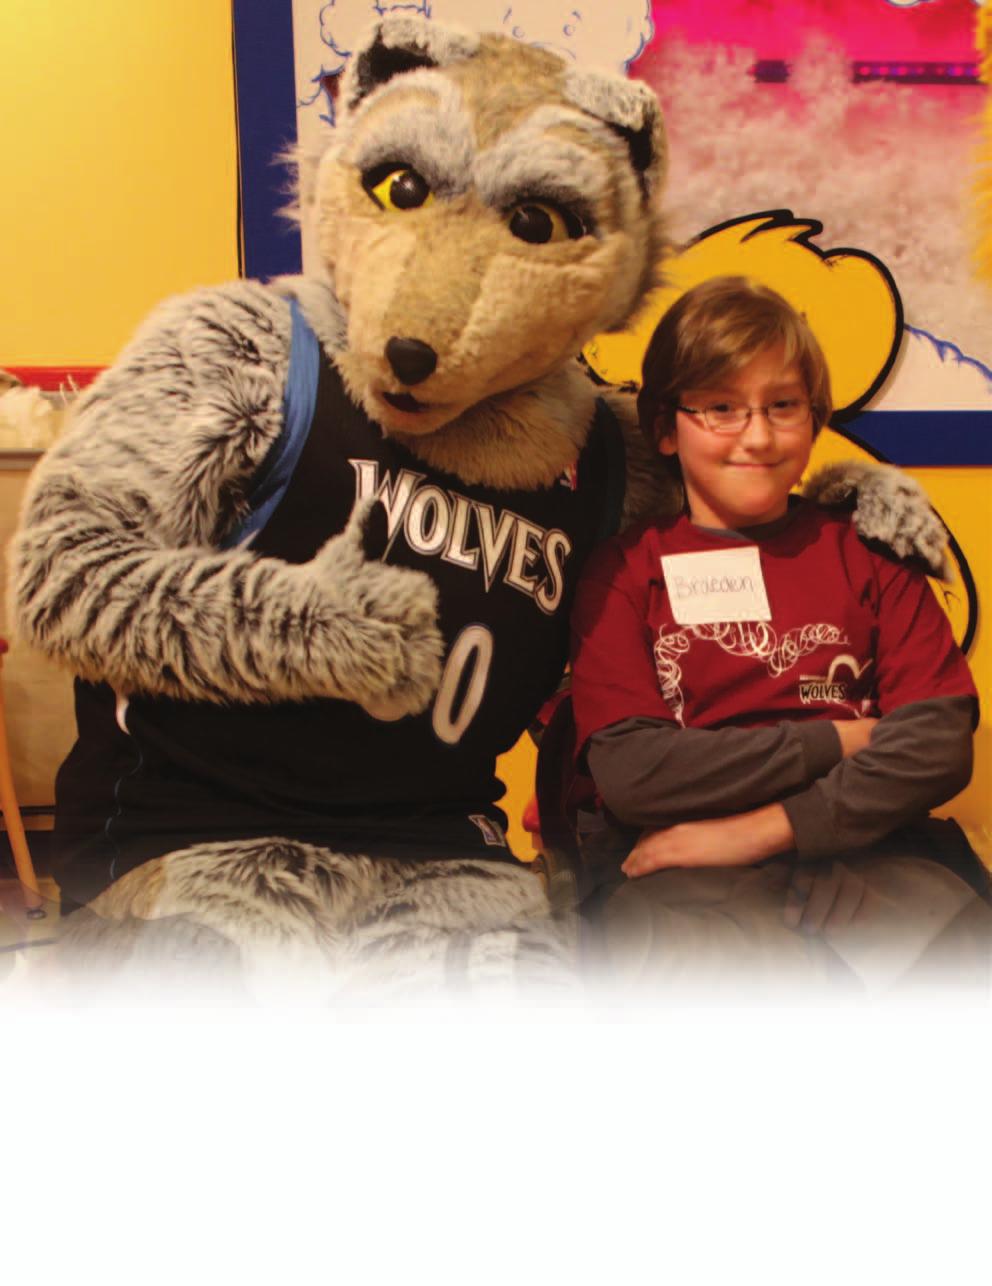 Wolves Care Luke Ridnour and Kosta Koufos visited Children's Hospitals and